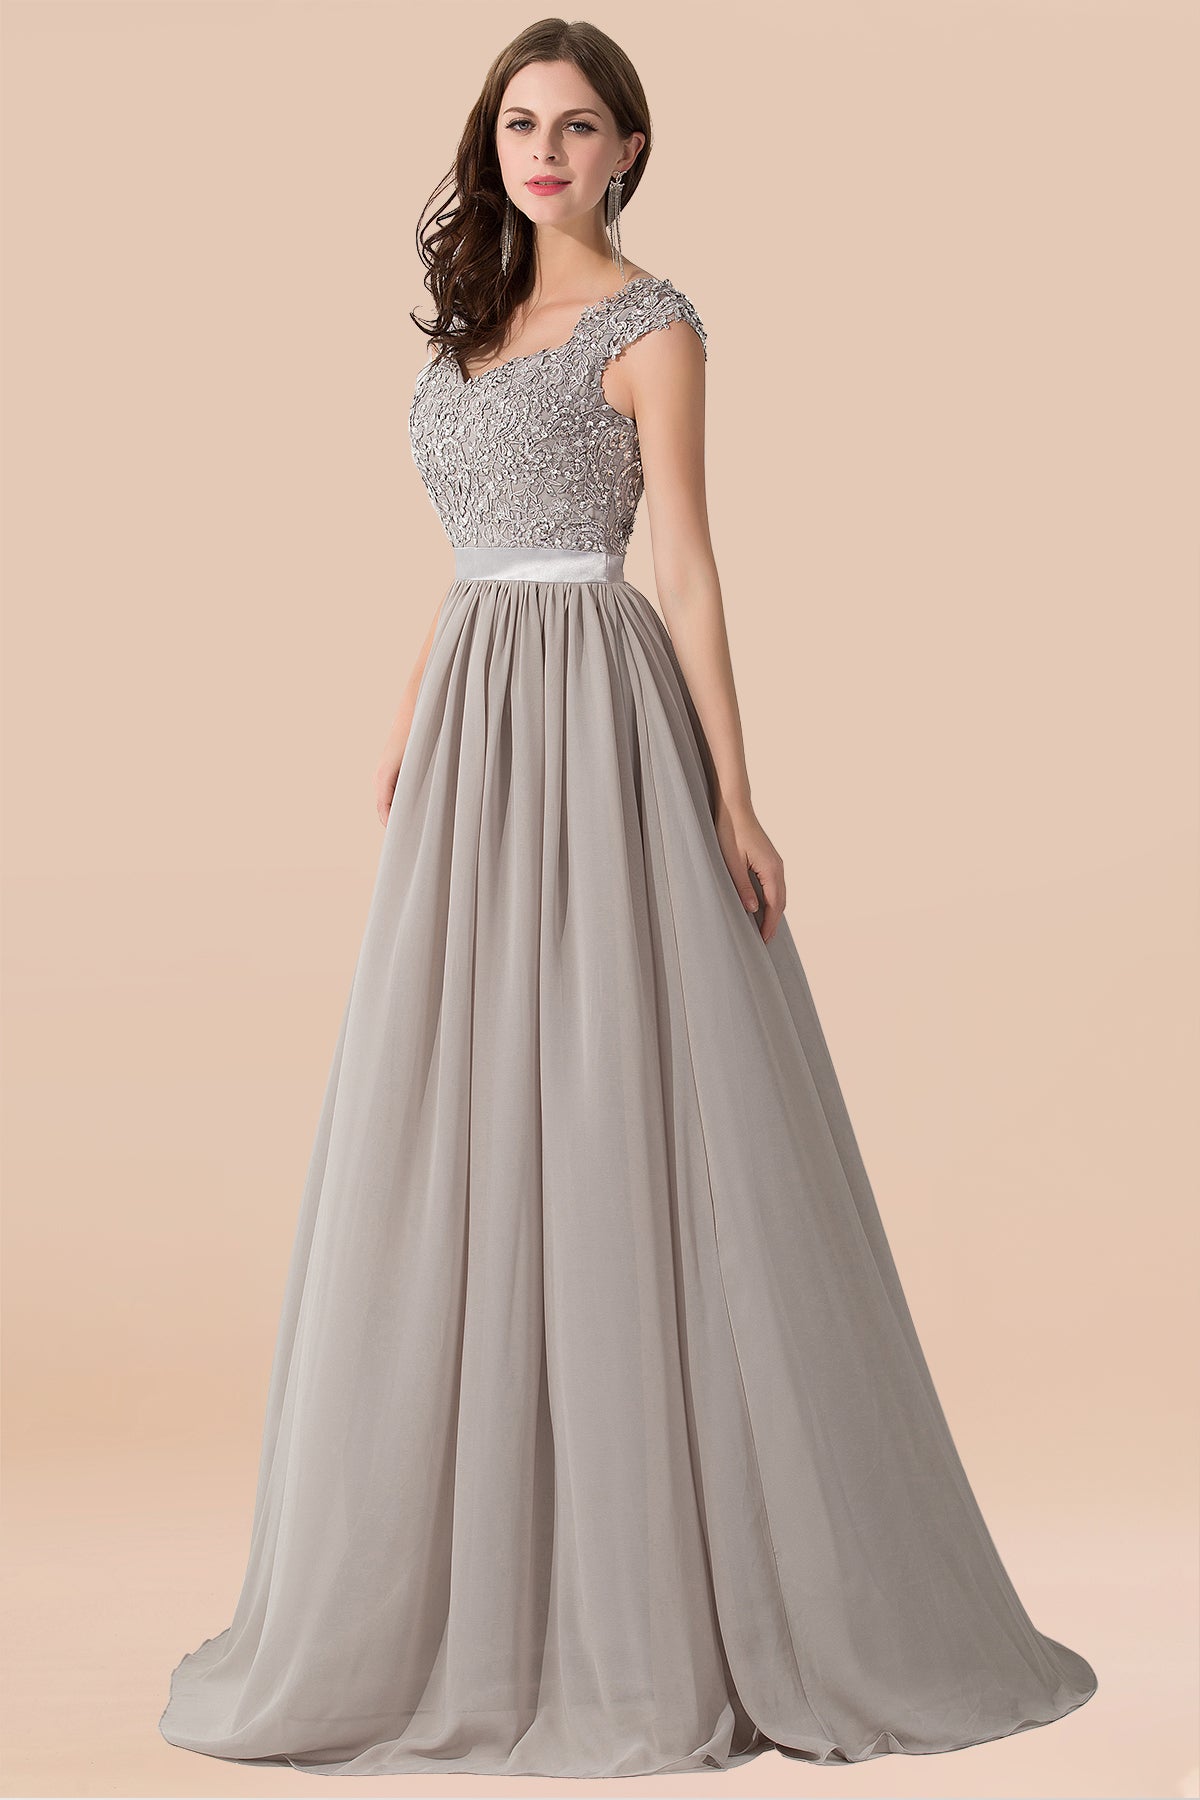 Vintage Silver Sleeveless Long Bridesmaid Dress With Appliques